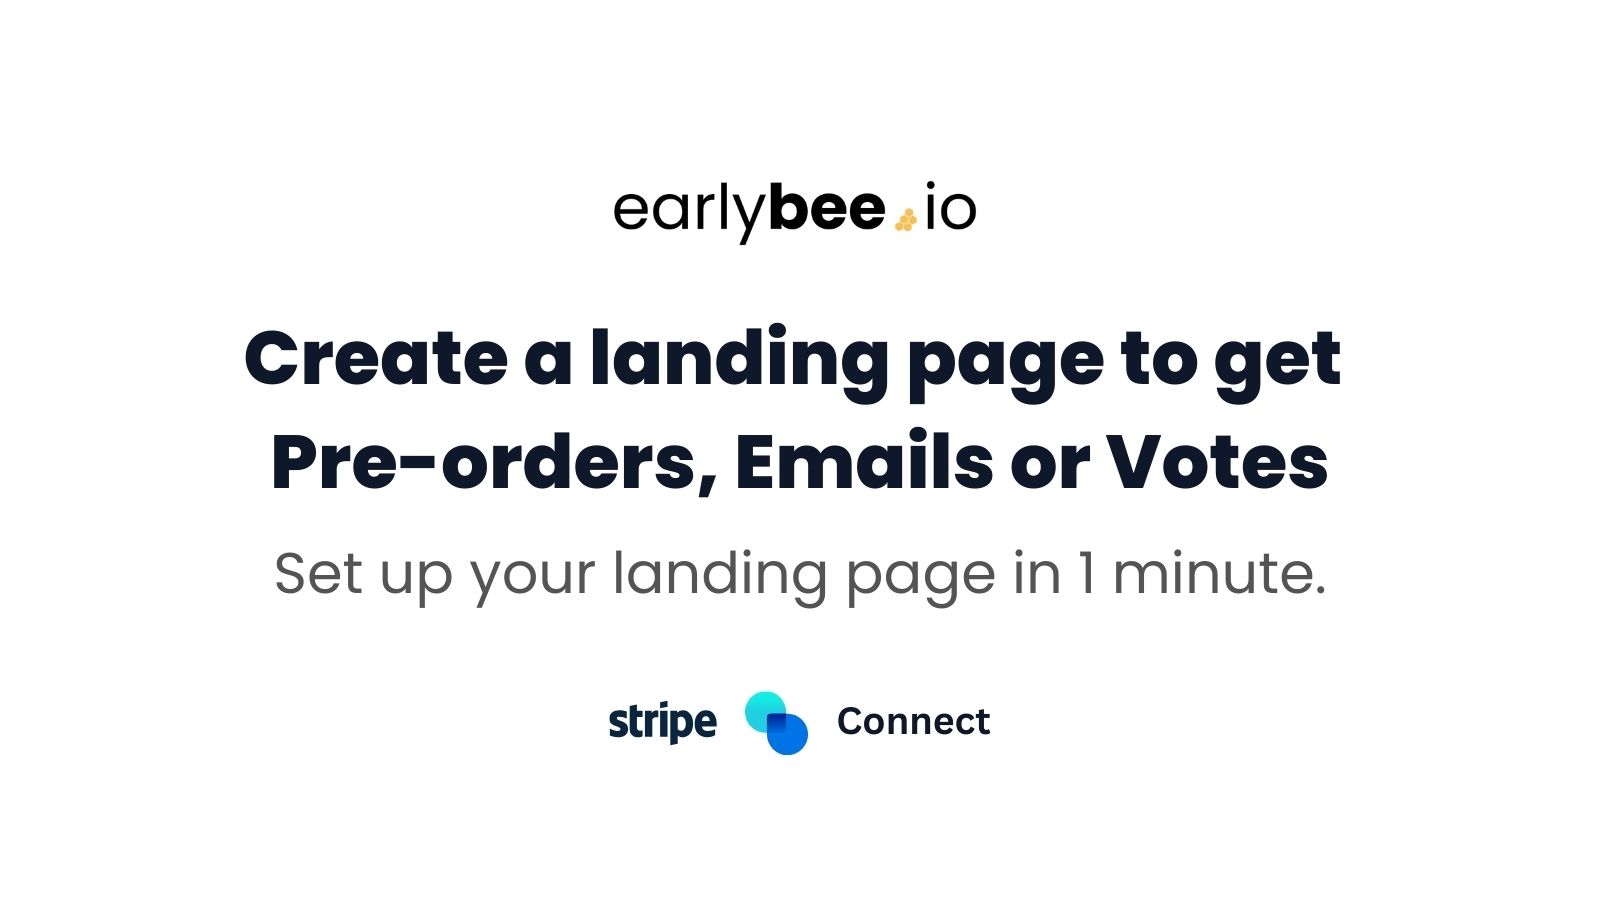 From idea to launch in 3 days  -  EarlyBee: Landing pages to get pre-orders, emails and votes